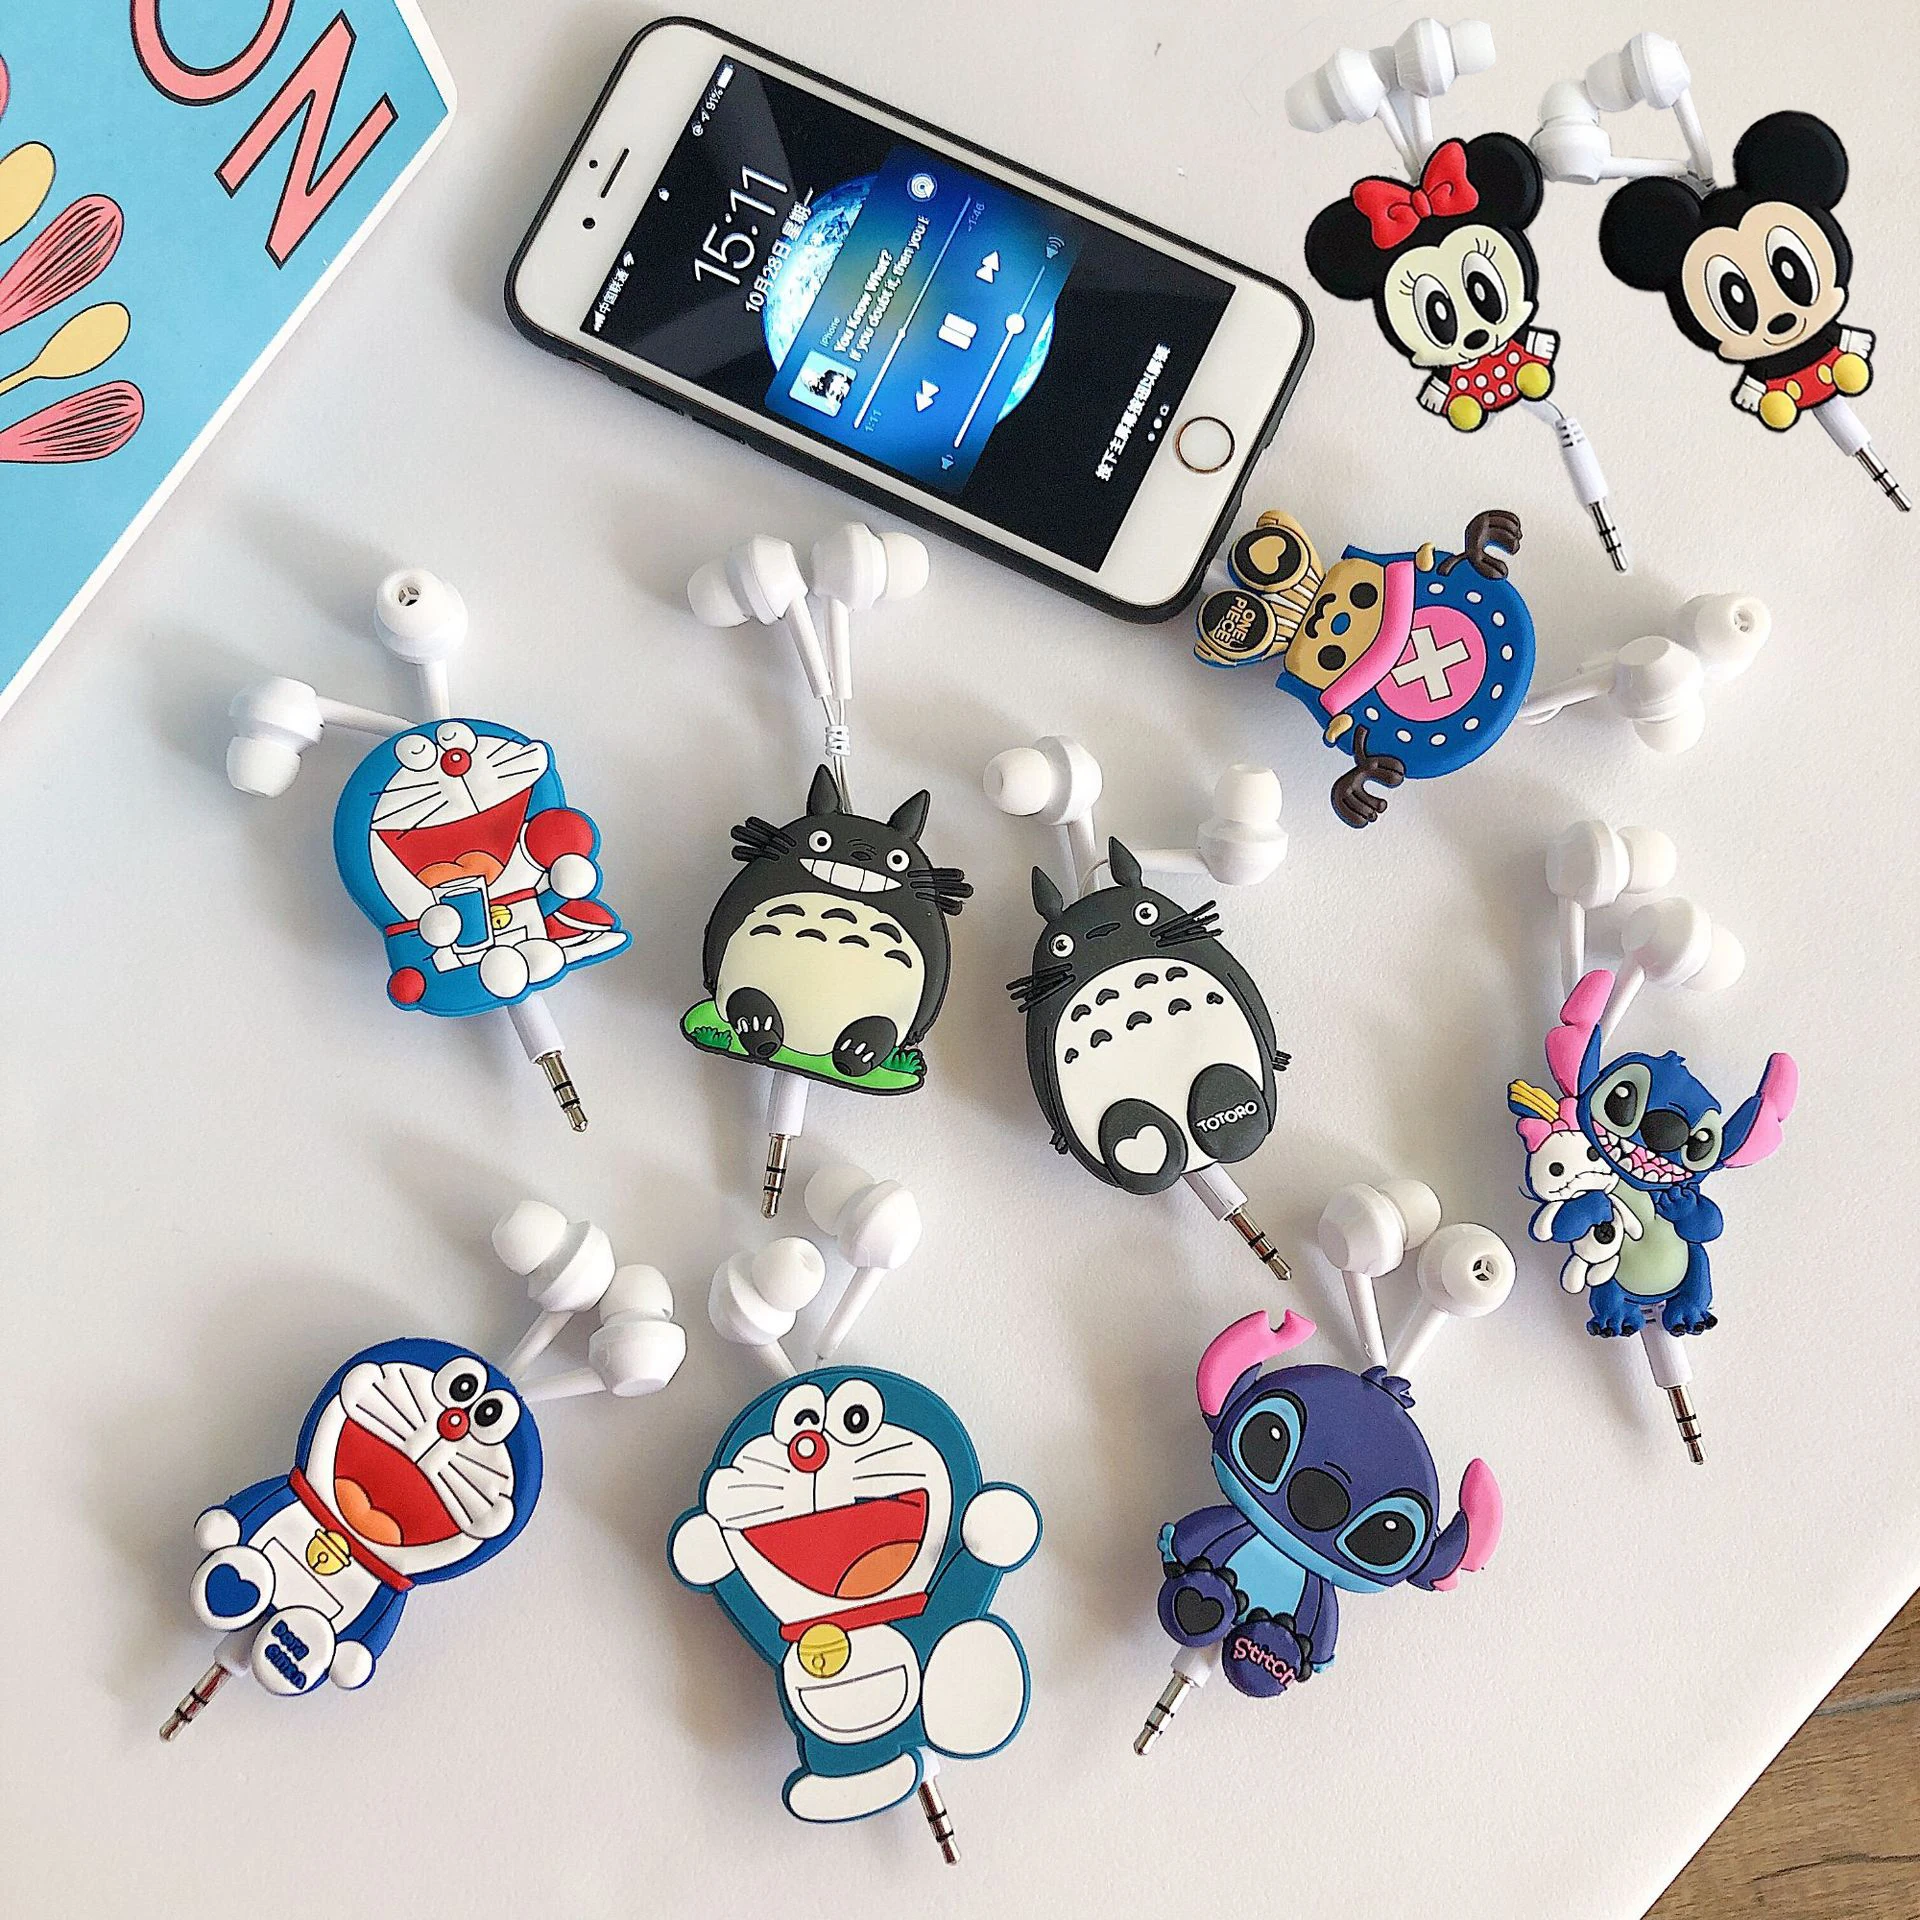 Disney Mickey Stitch Cartoon Headphones Cute 3.5mm Wired Earphone Retractable Automatic Headset For Kids Girls Gifts